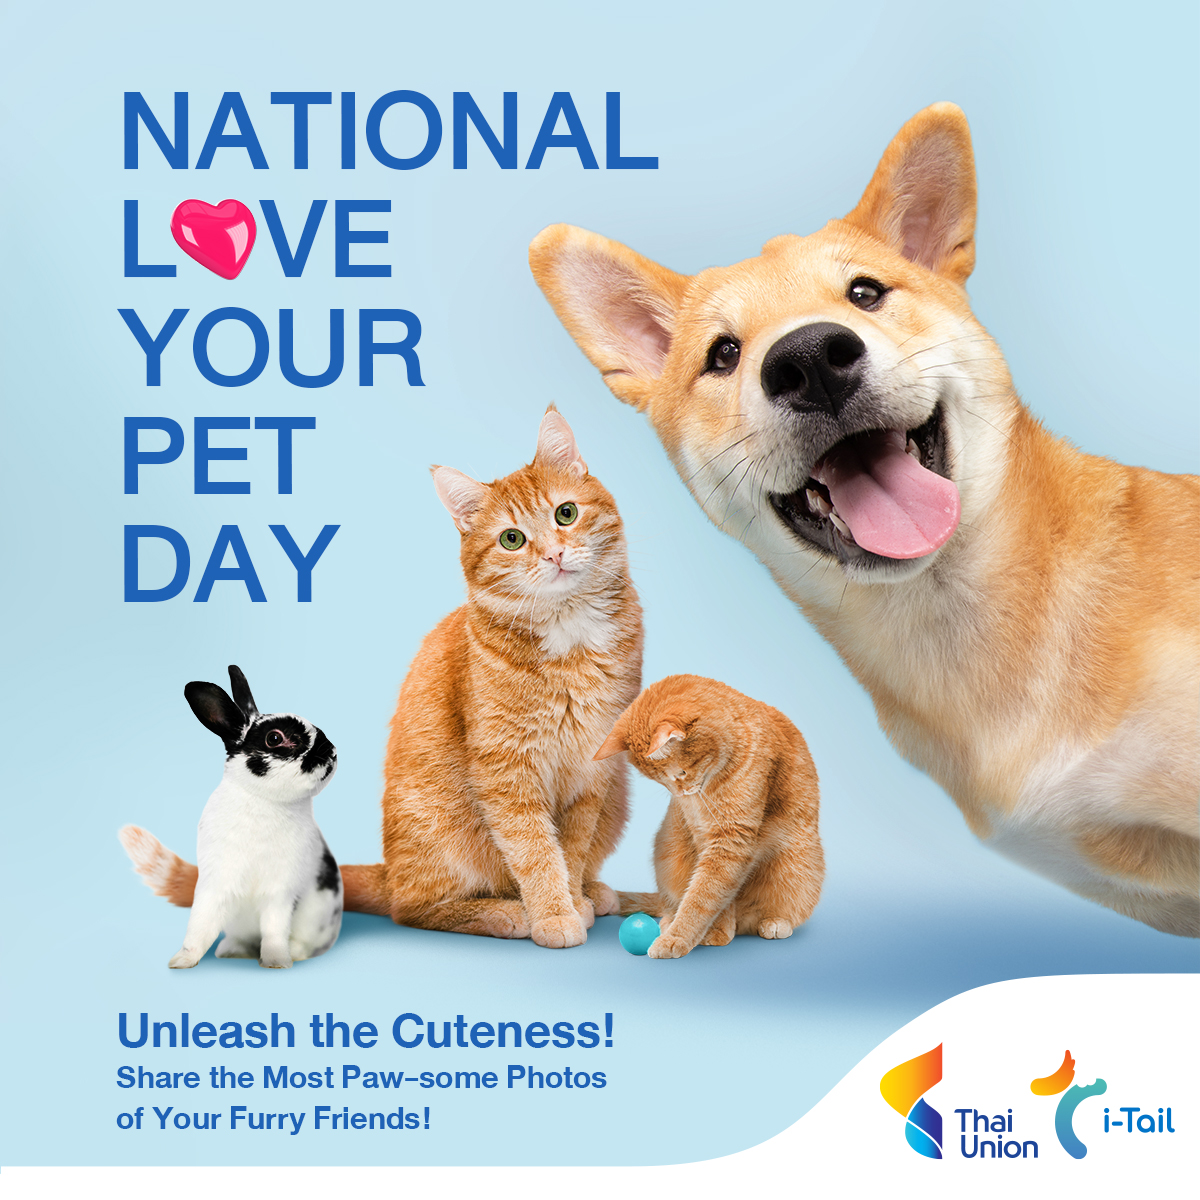 🐱🐶Today's the day we celebrate our furry ball like never before. it's National Love Your Pet Day. Let's take a moment to really appreciate the incredible bond we share with our pets. #ThaiUnion #HealthyLivingHealthyOceans #iTail #NationalLoveYourPetDay